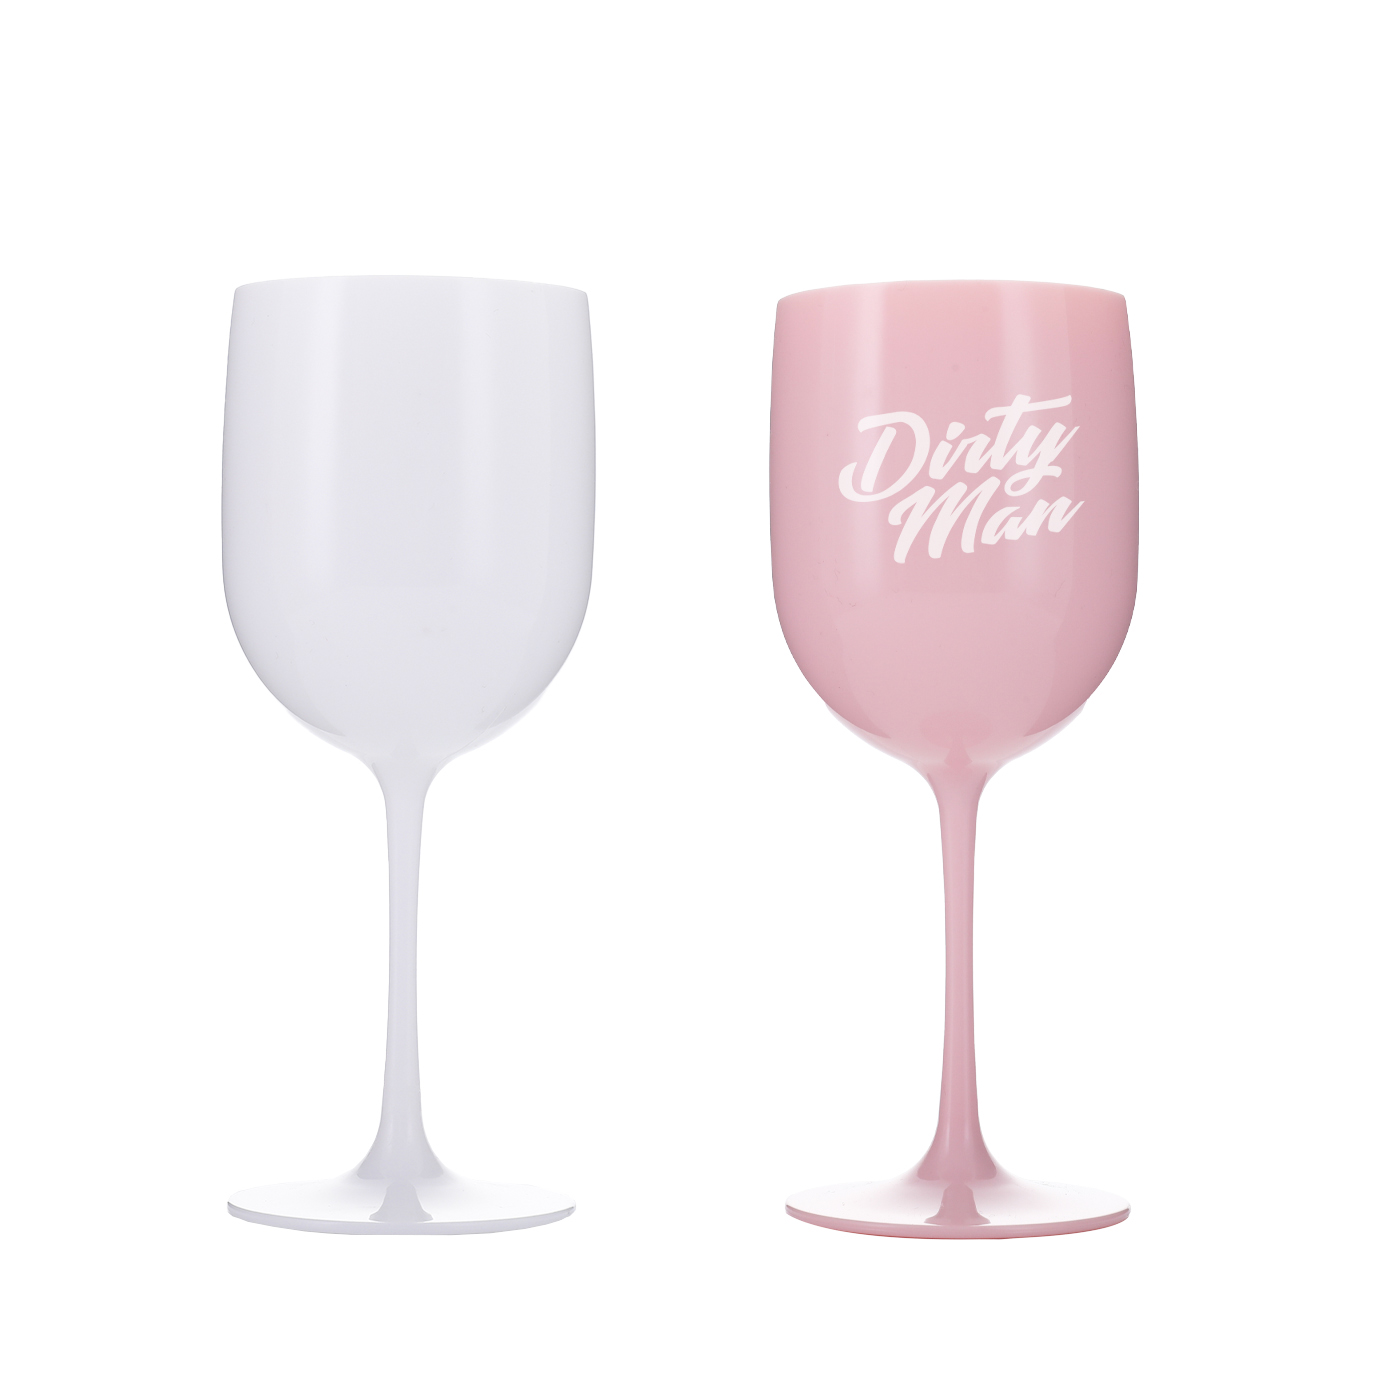 10 oz. Promotional Colored Plastic Wine Glass